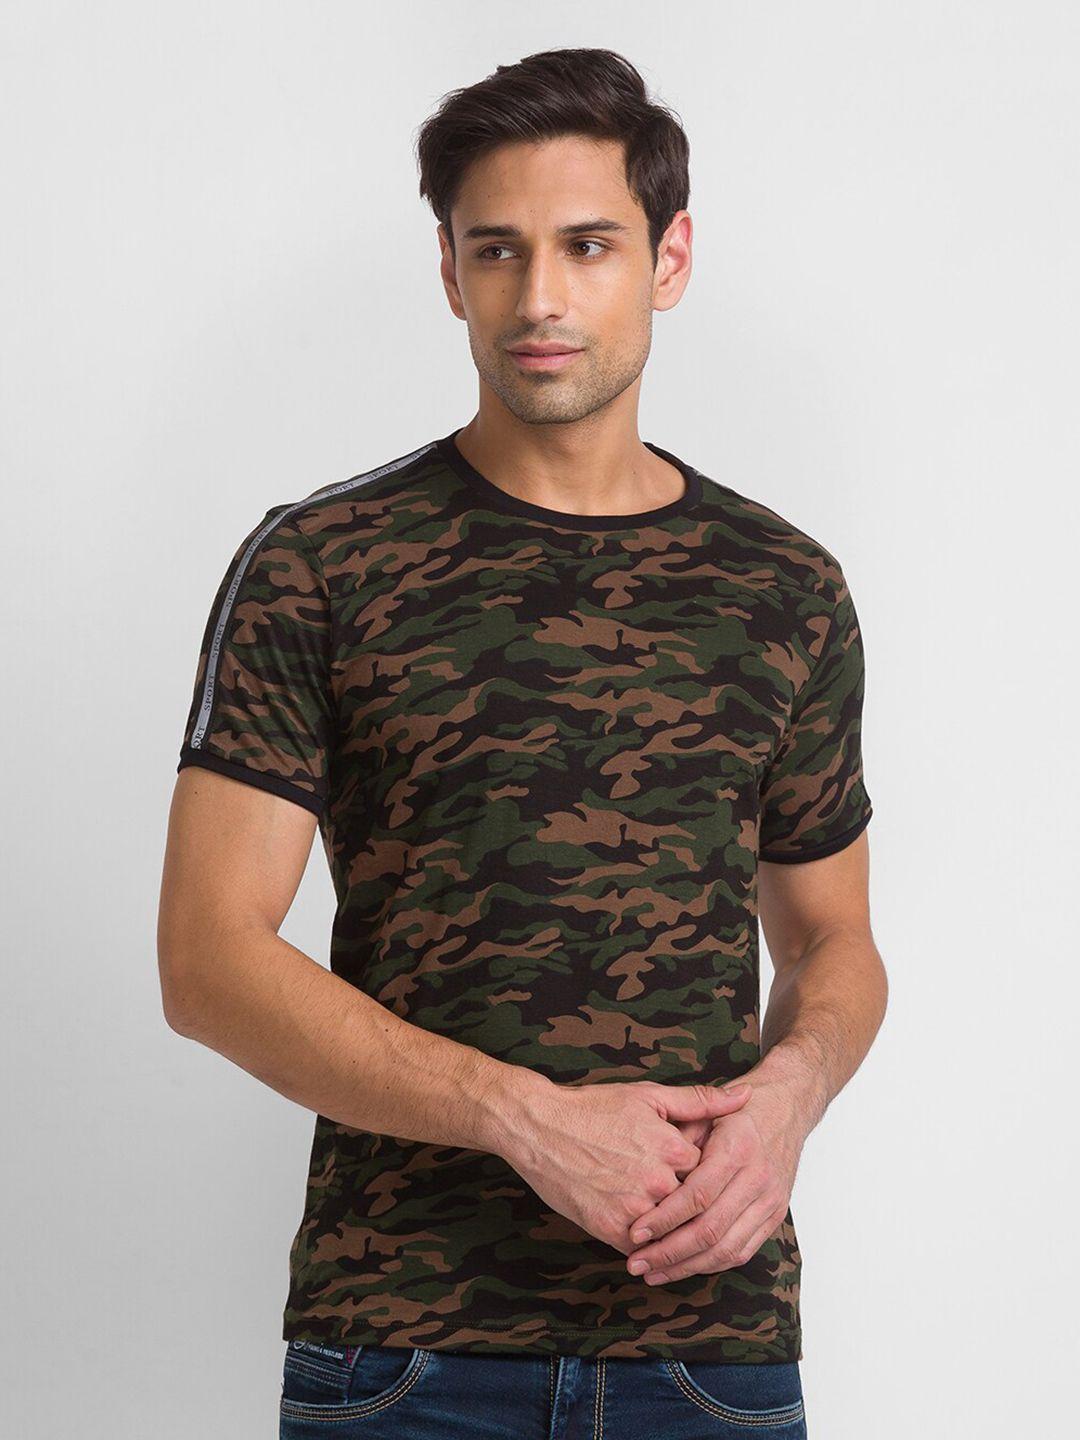 Globus Men Olive Green Camouflage Printed Cotton T-shirt